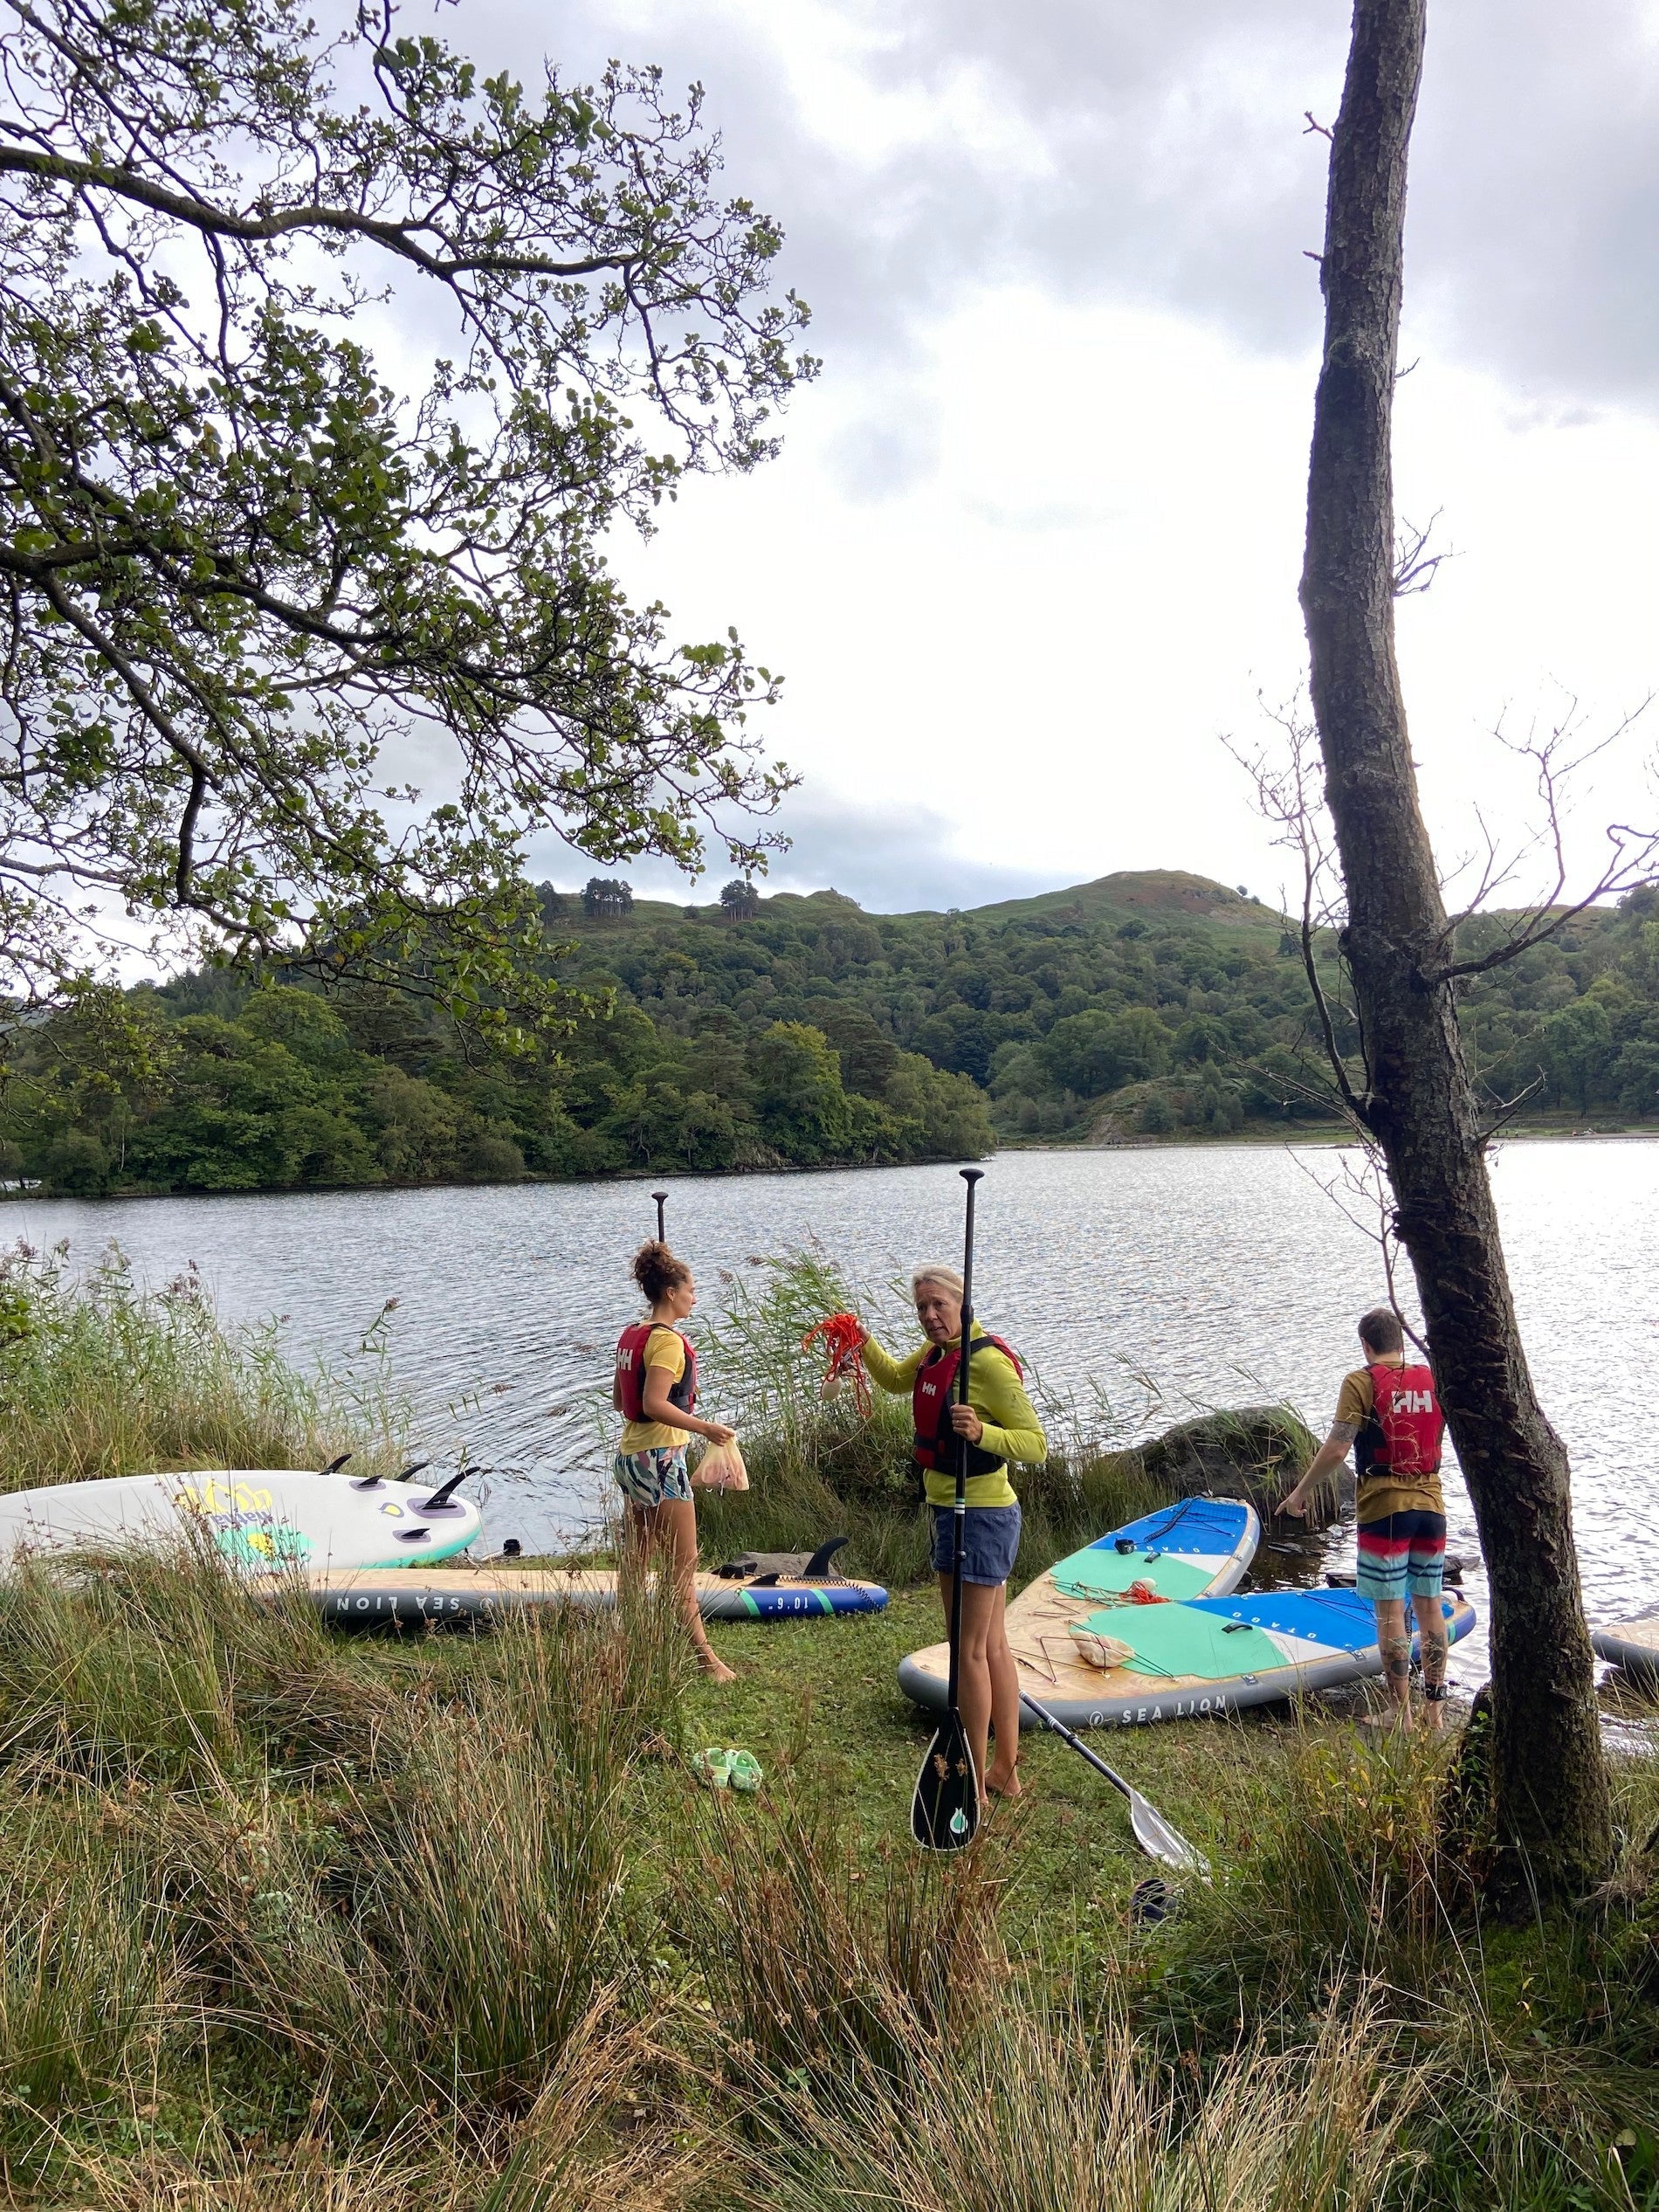 September 29th Yoga Retreat in the Lake District: yoga, paddleboarding, lakes and mountains